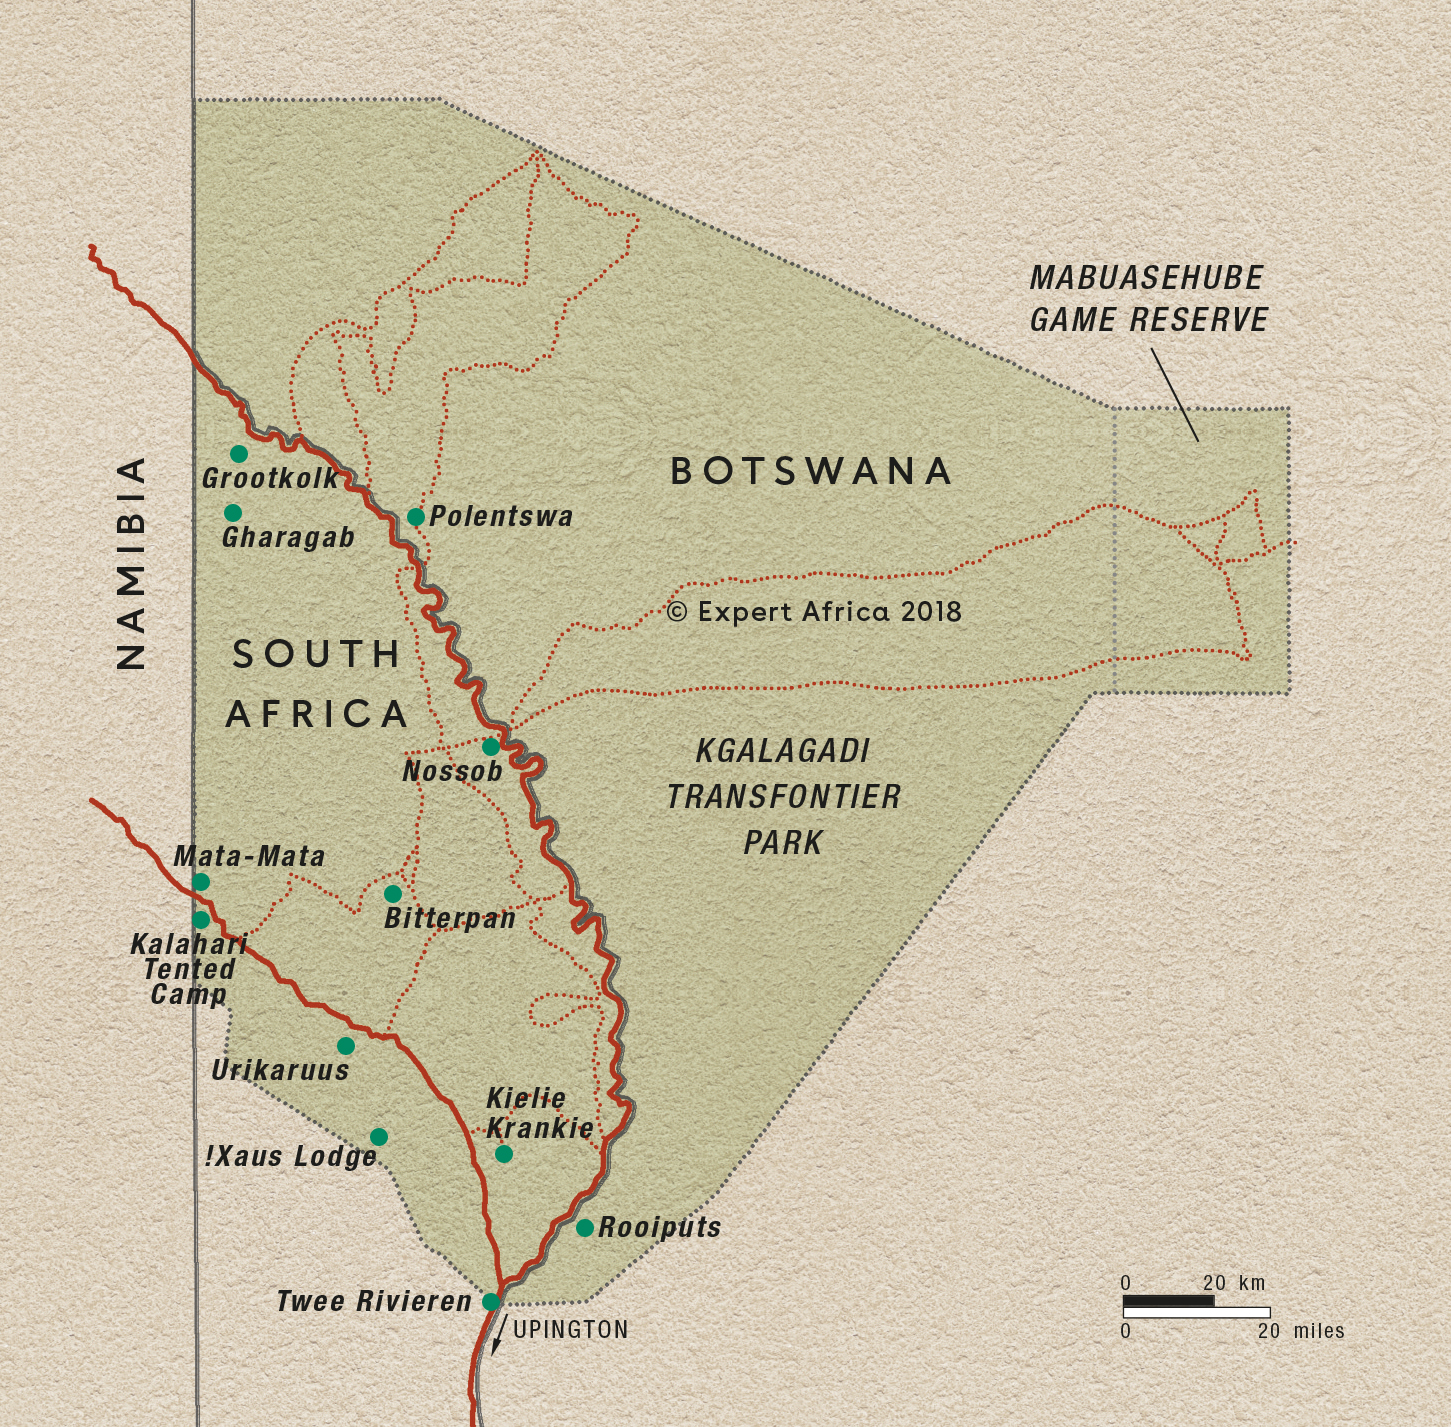 Kgalagadi Transfrontier Park Map Kgalagadi Transfrontier Park reference map in South Africa 